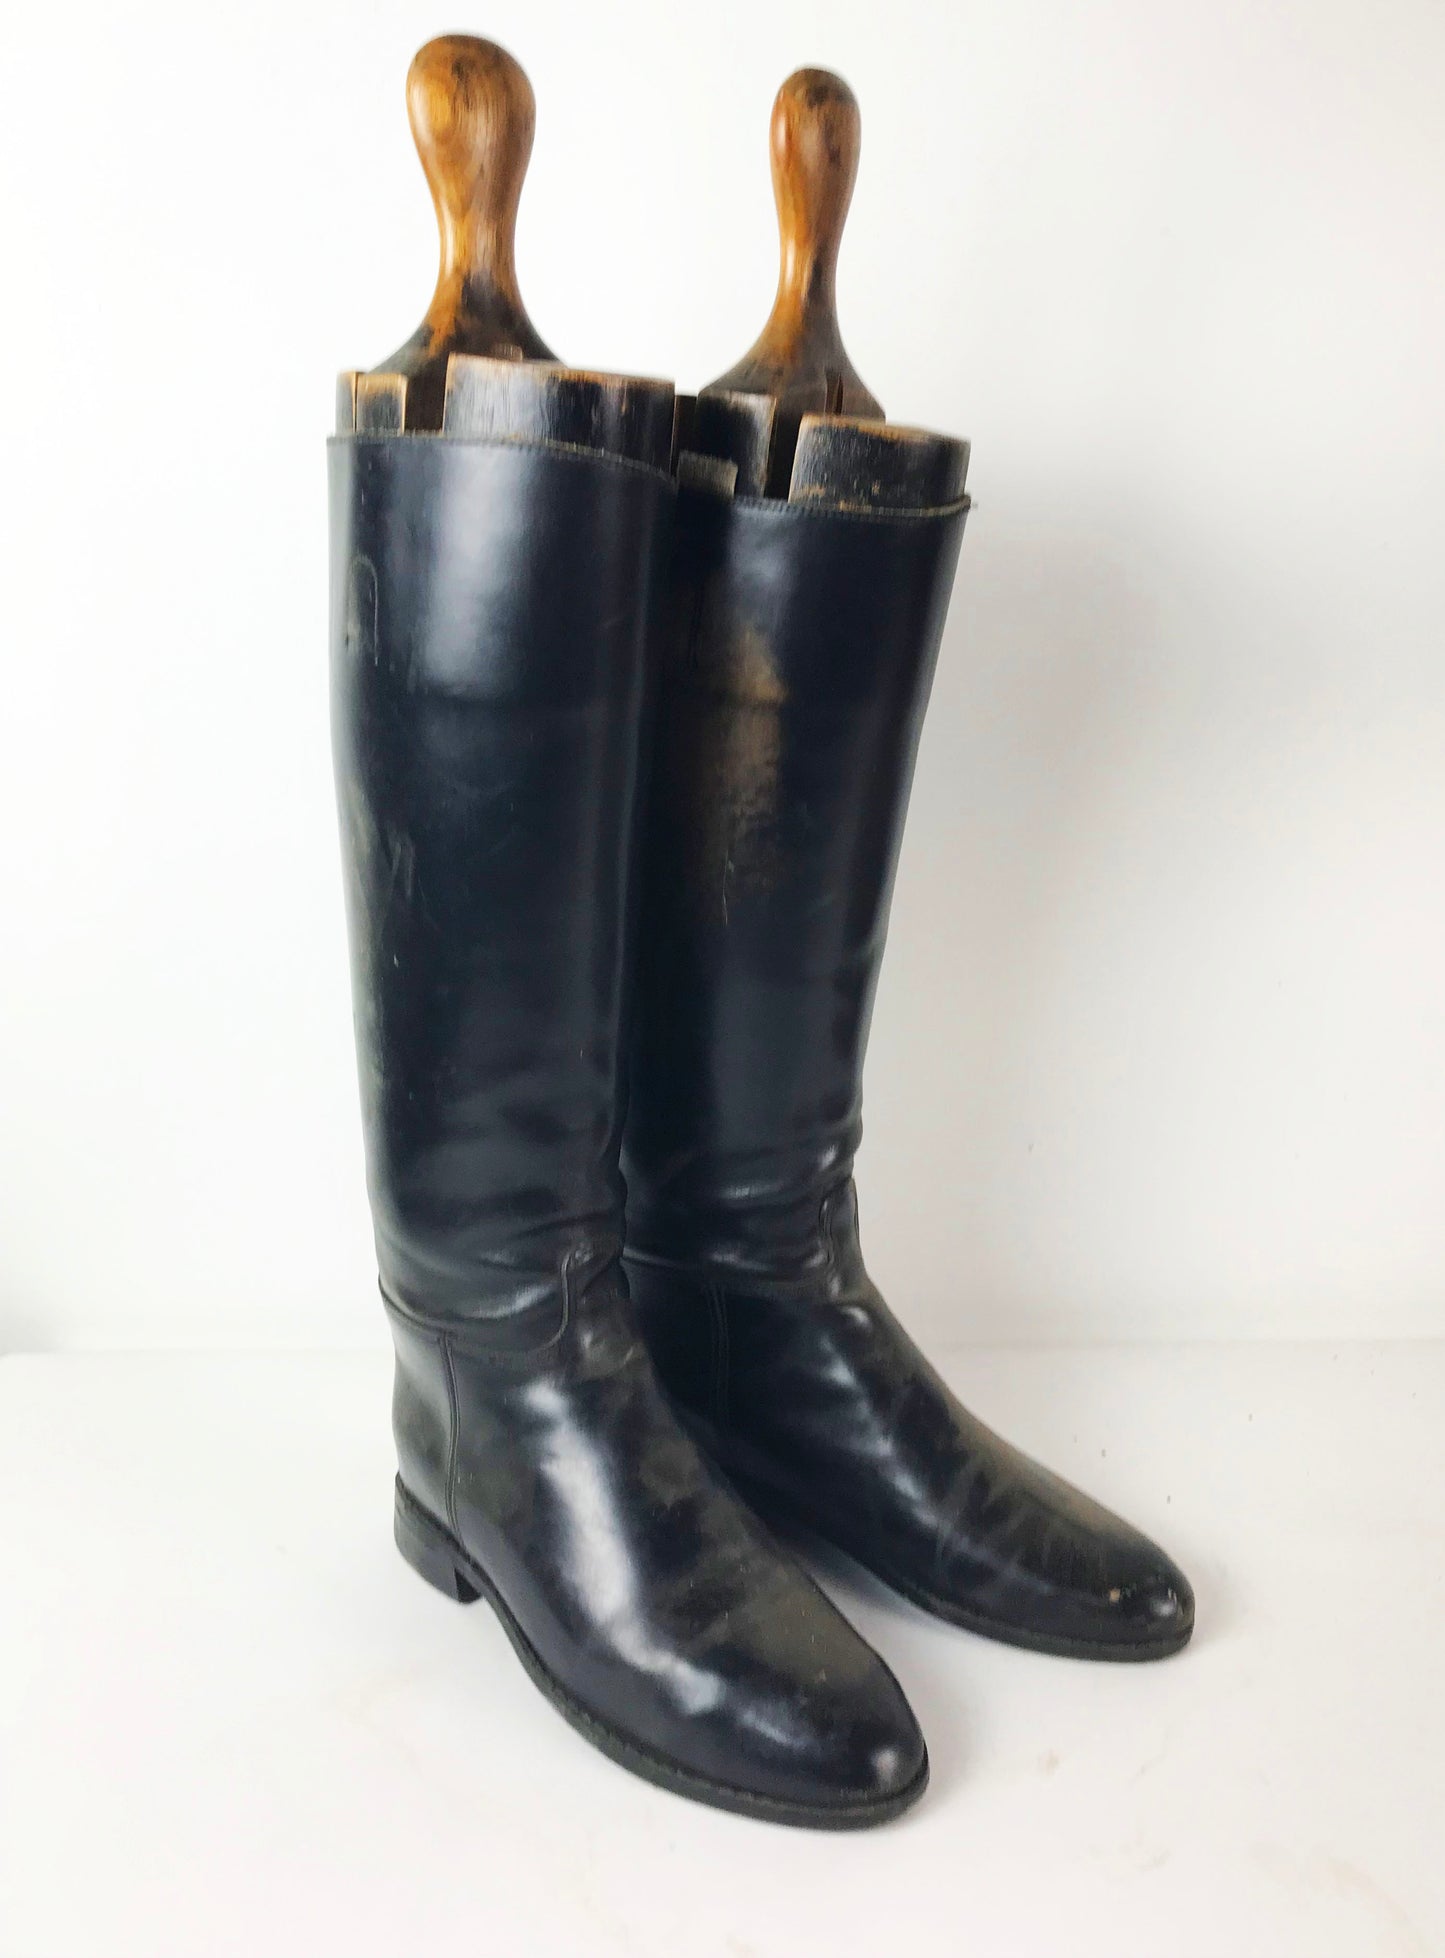 Vintage Leather Riding Boots with Fitted wooden Shoe Trees